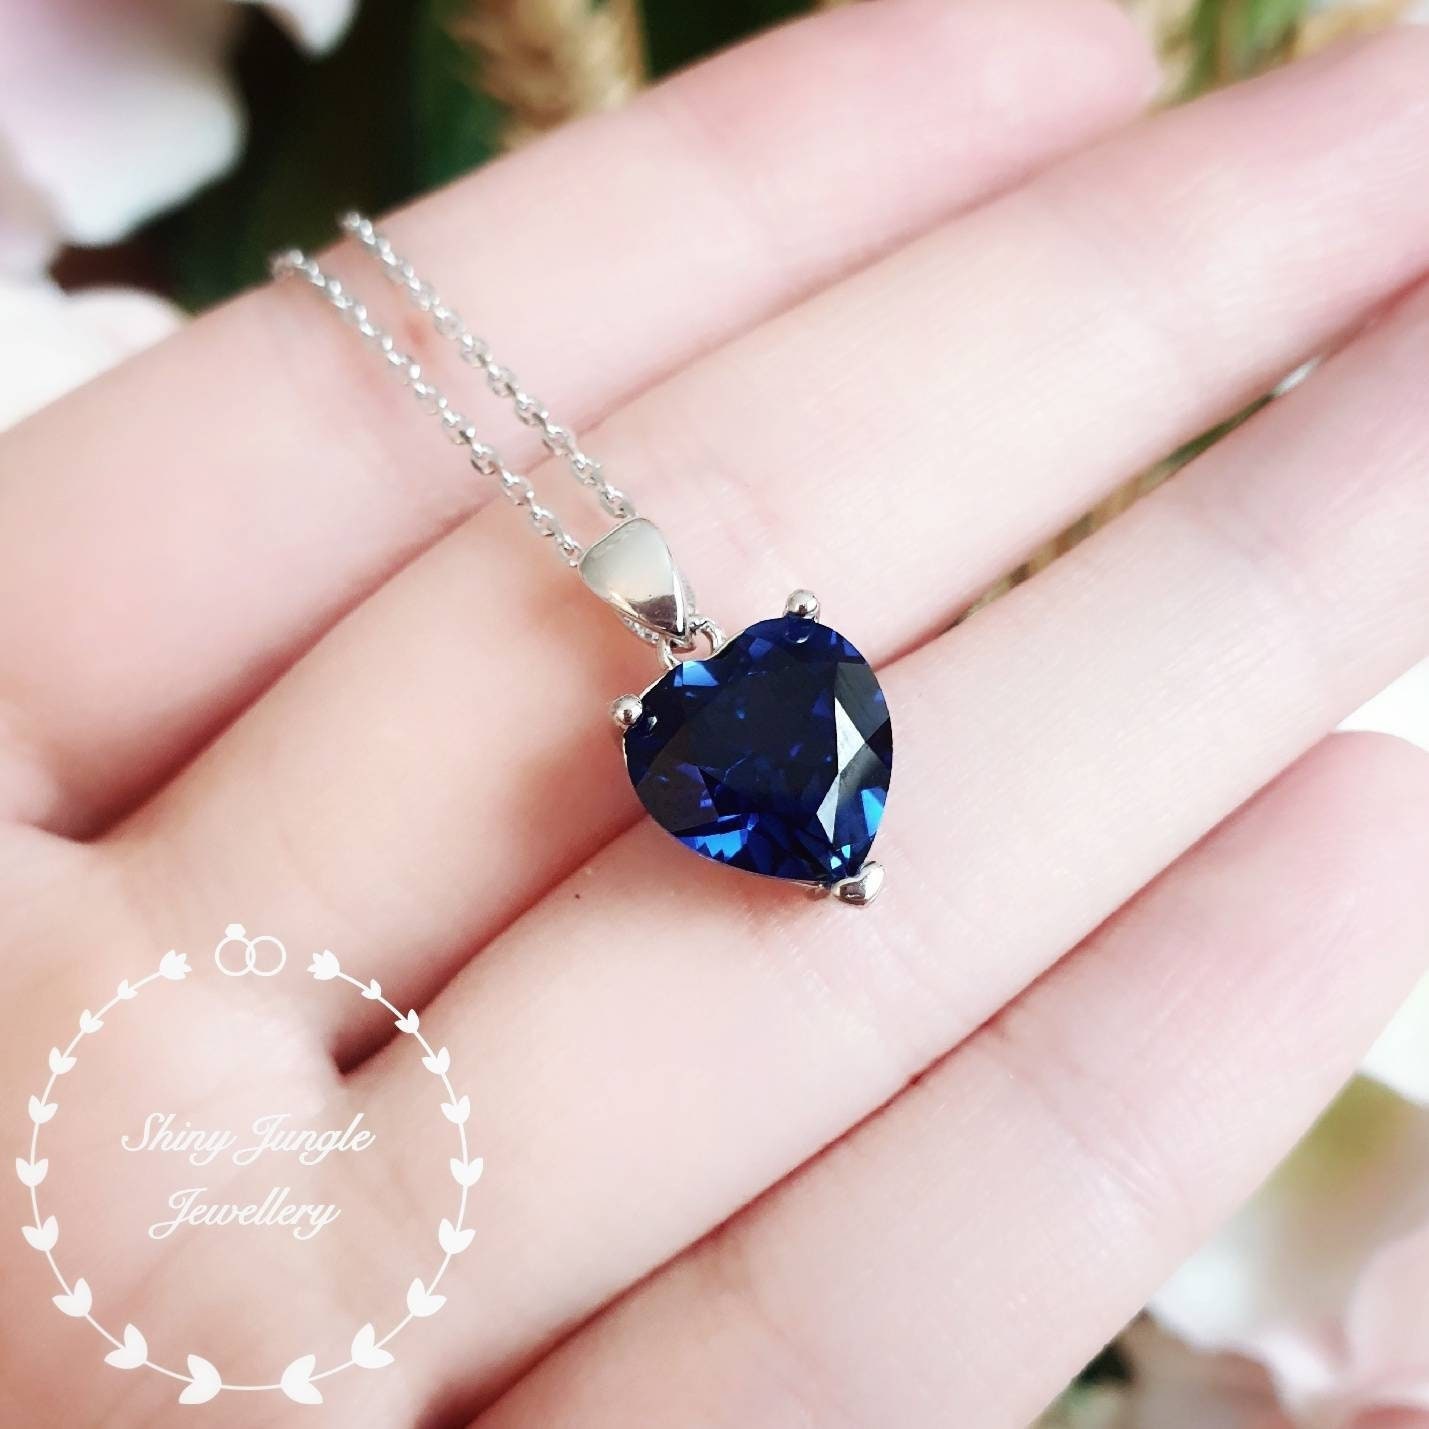 Big Bridal Blue Sapphire Necklace with Long Earrings - Gleam Jewels